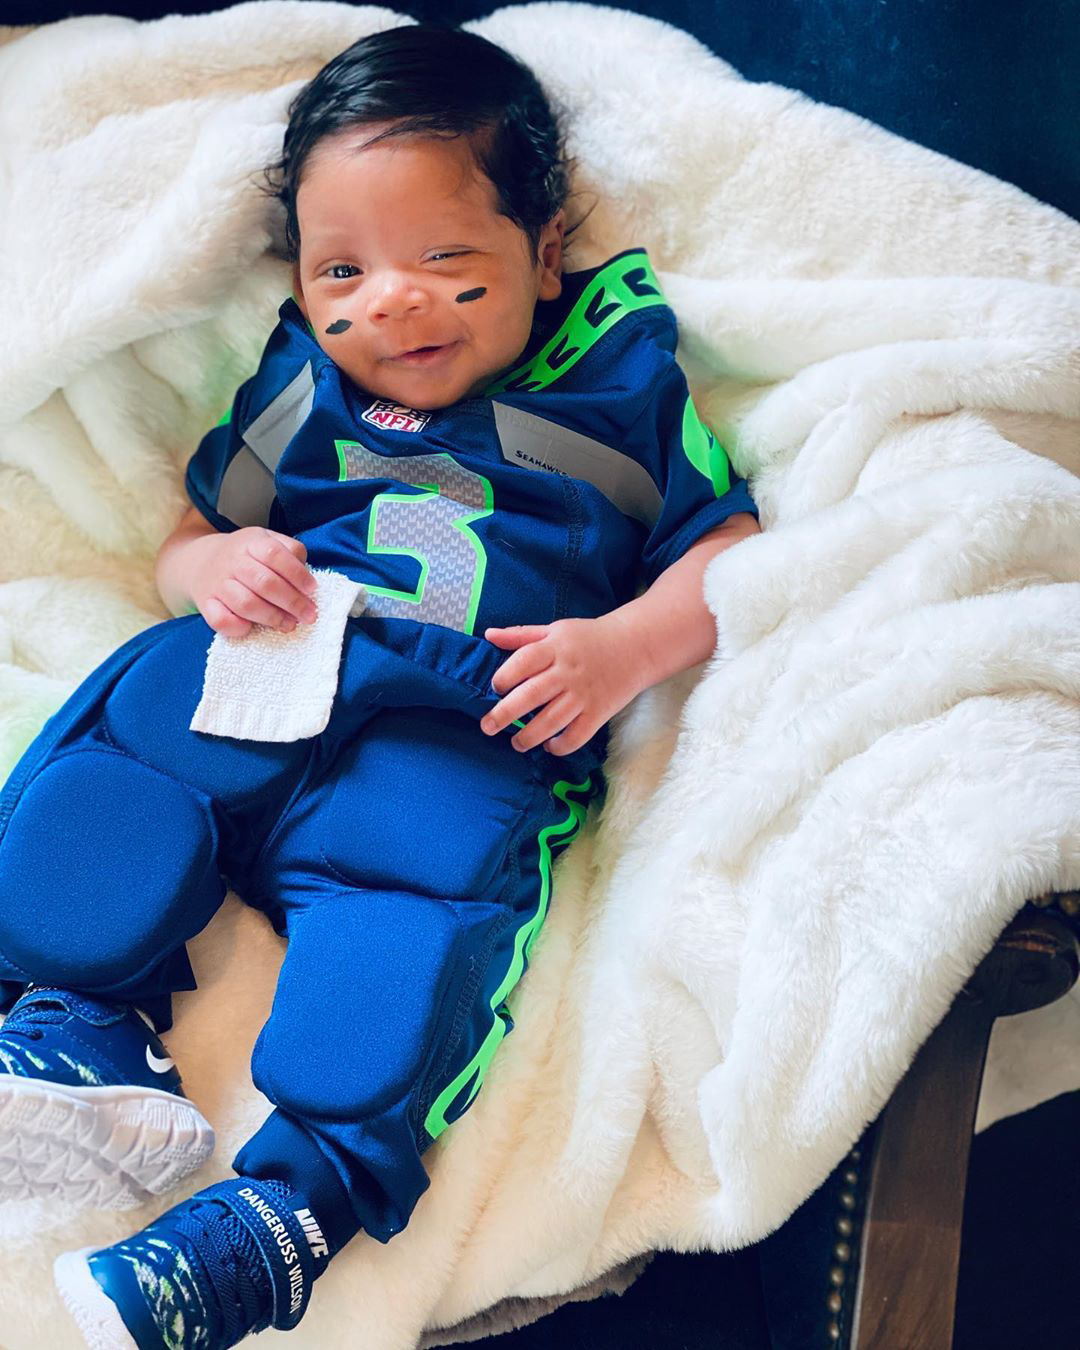 Ciara Dresses Son in Football Uniform Ahead of Russell Wilson's Game